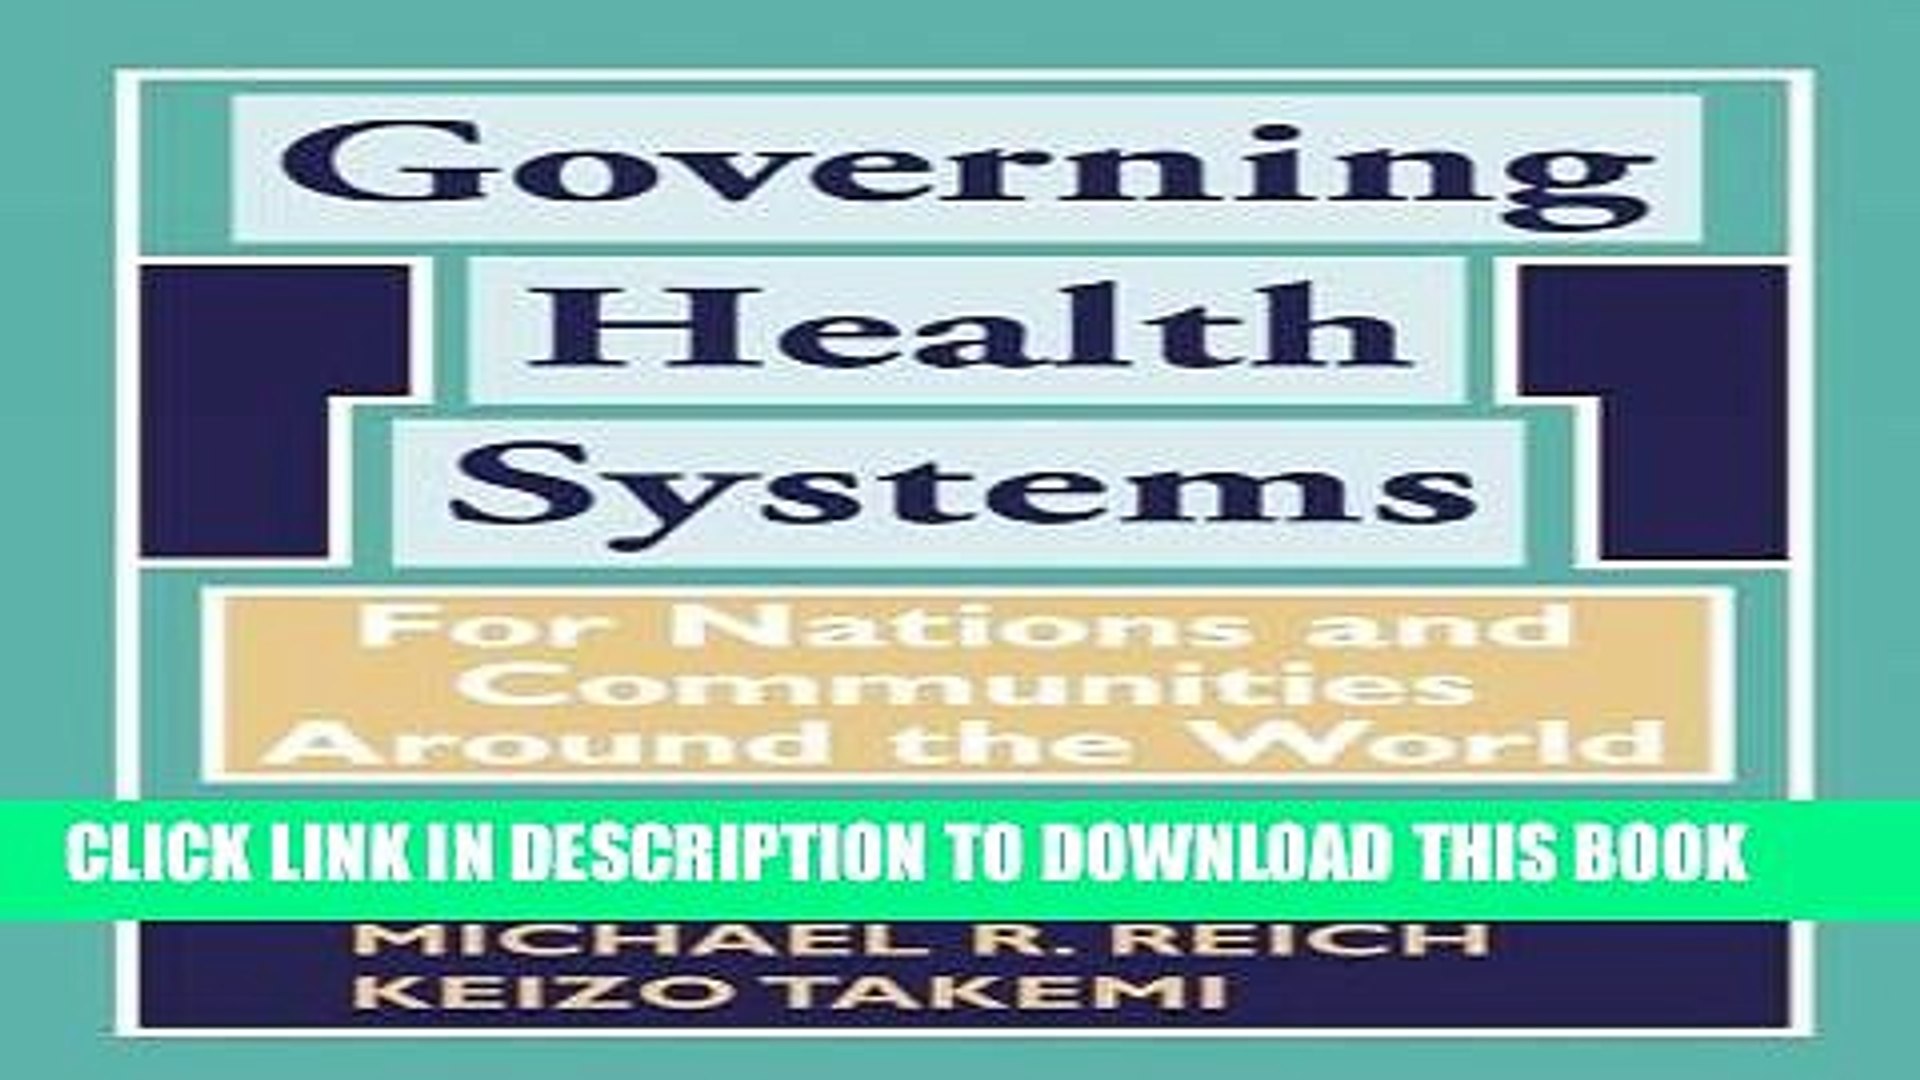 [PDF] Governing Health Systems: For Nations and Communities Around the World Popular Online